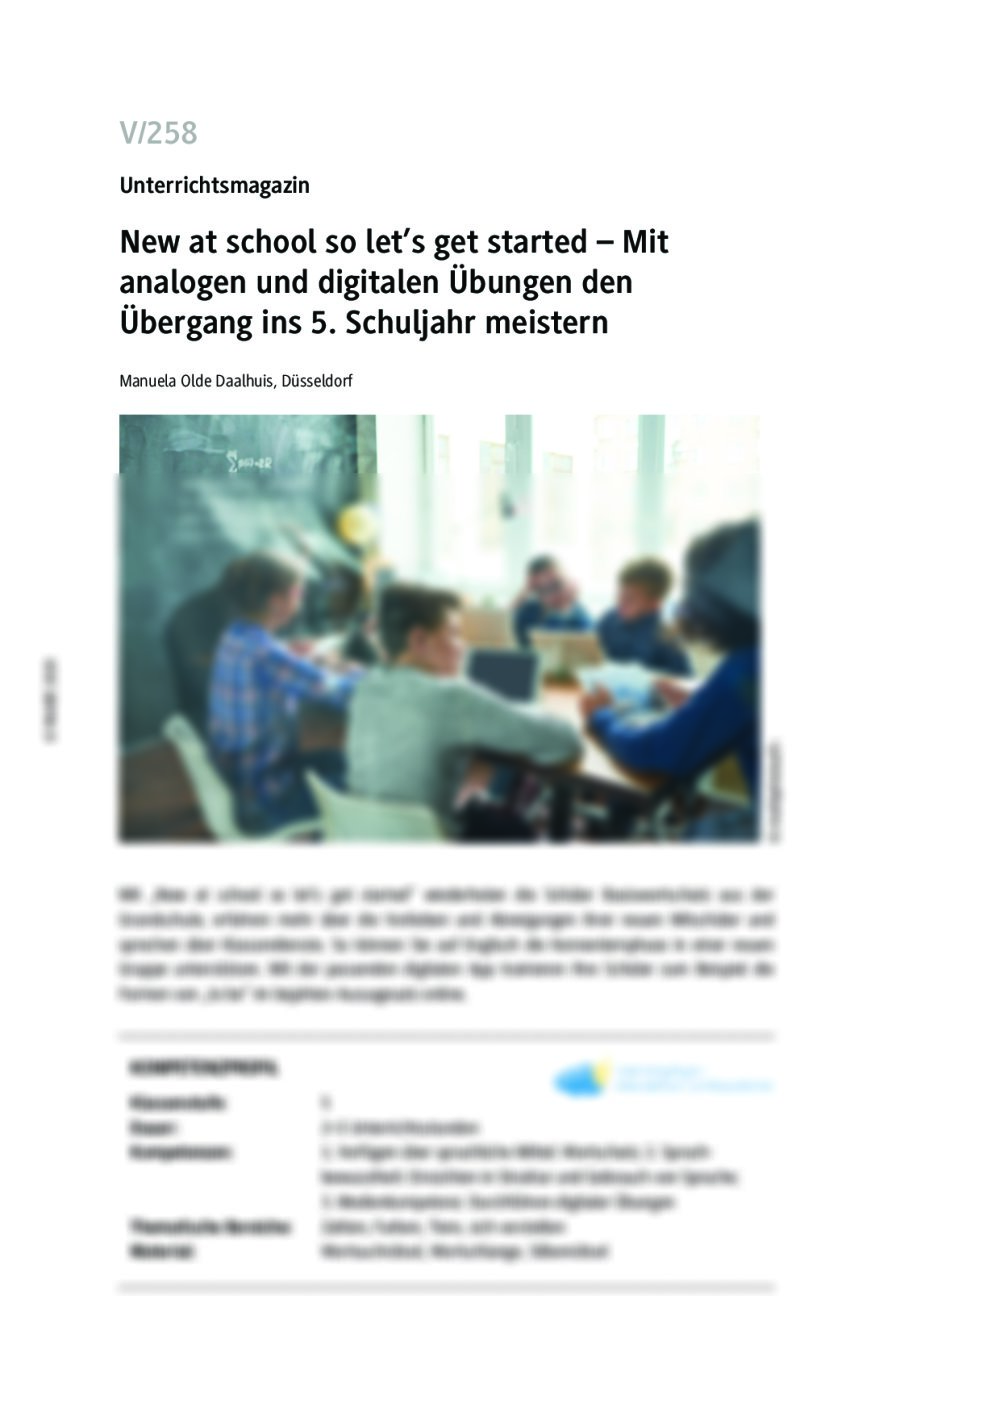 New at school so let's get started - Seite 1